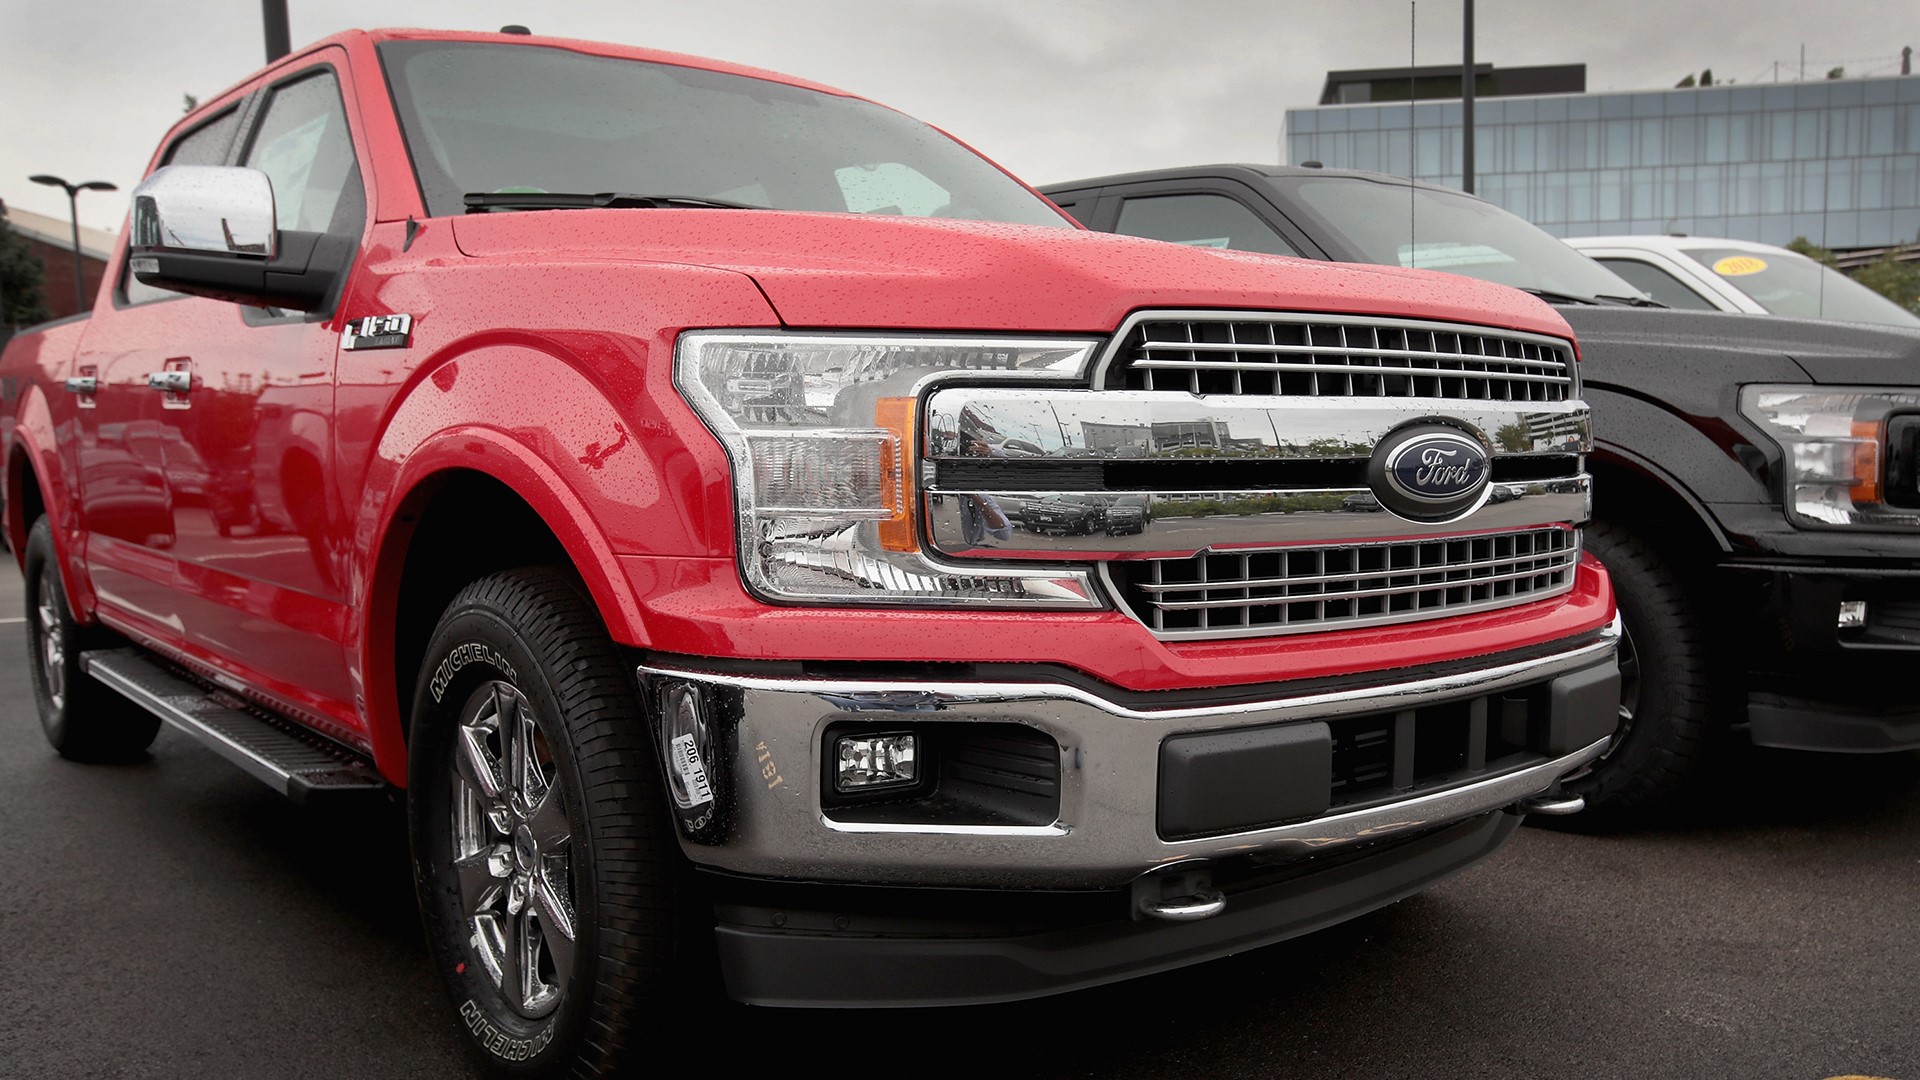 Prices on pretty much everything are climbing, and your ride is no exception. The costs of buying a new truck have gone up.